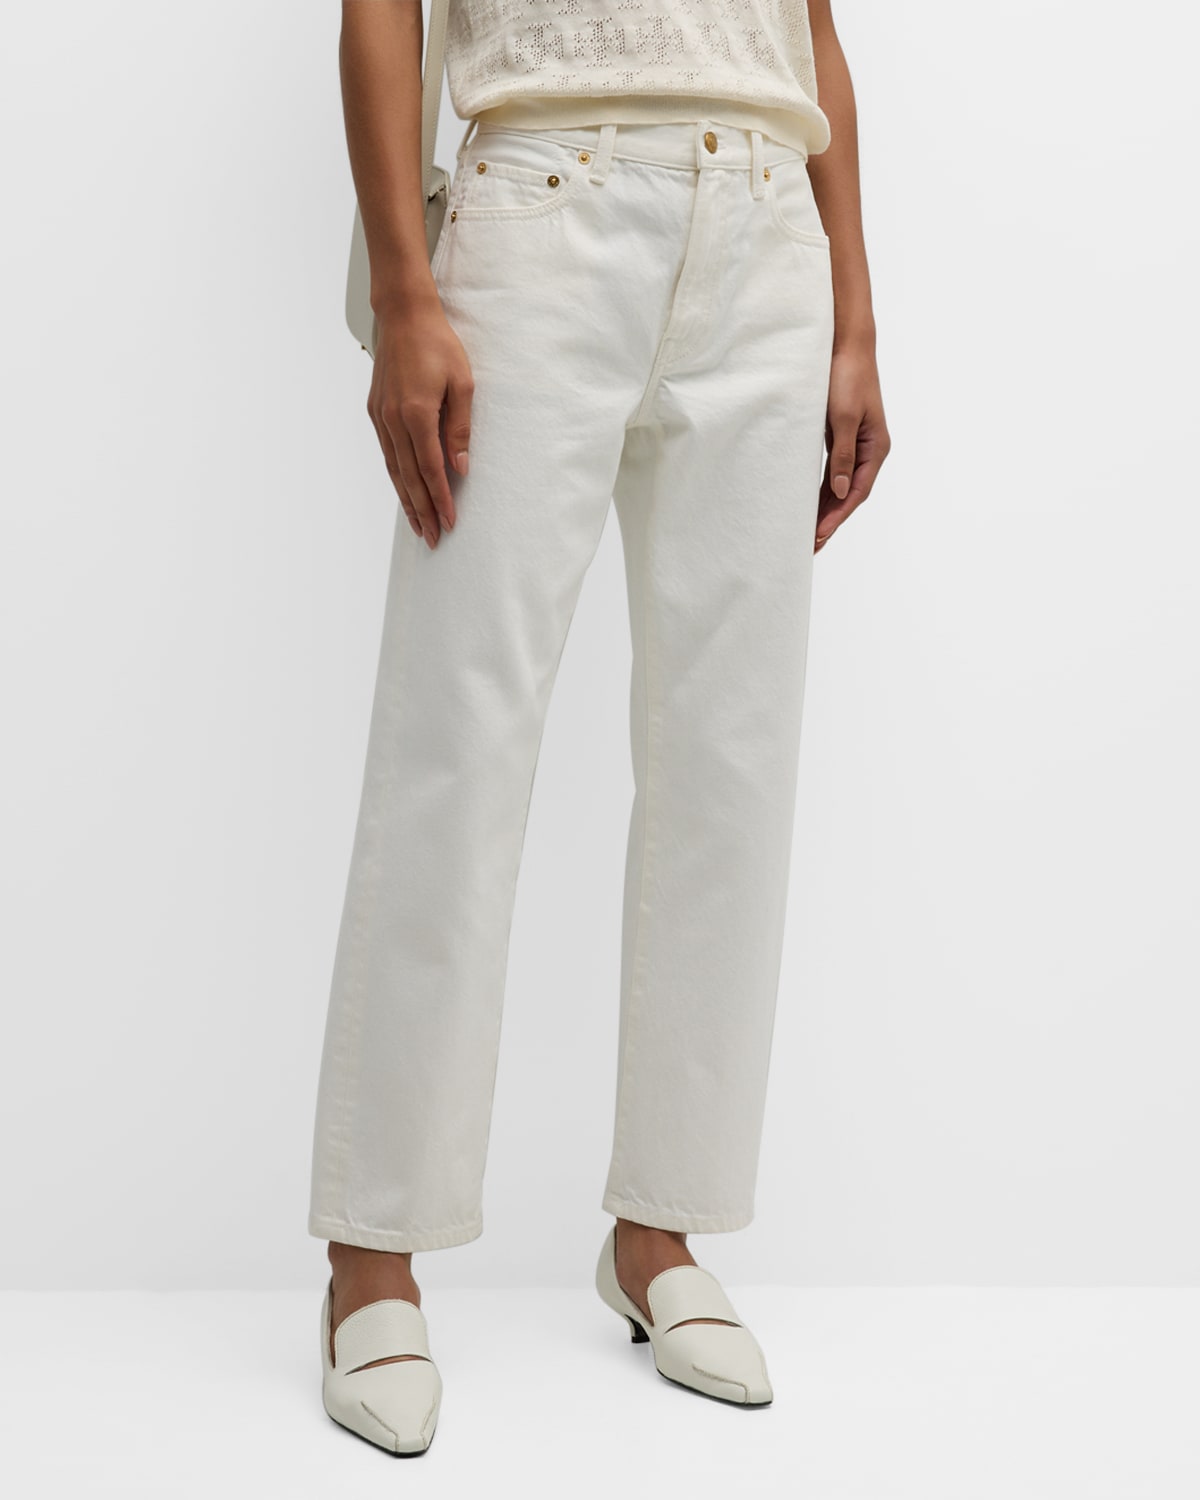 TORY BURCH MID-RISE CROPPED JEANS